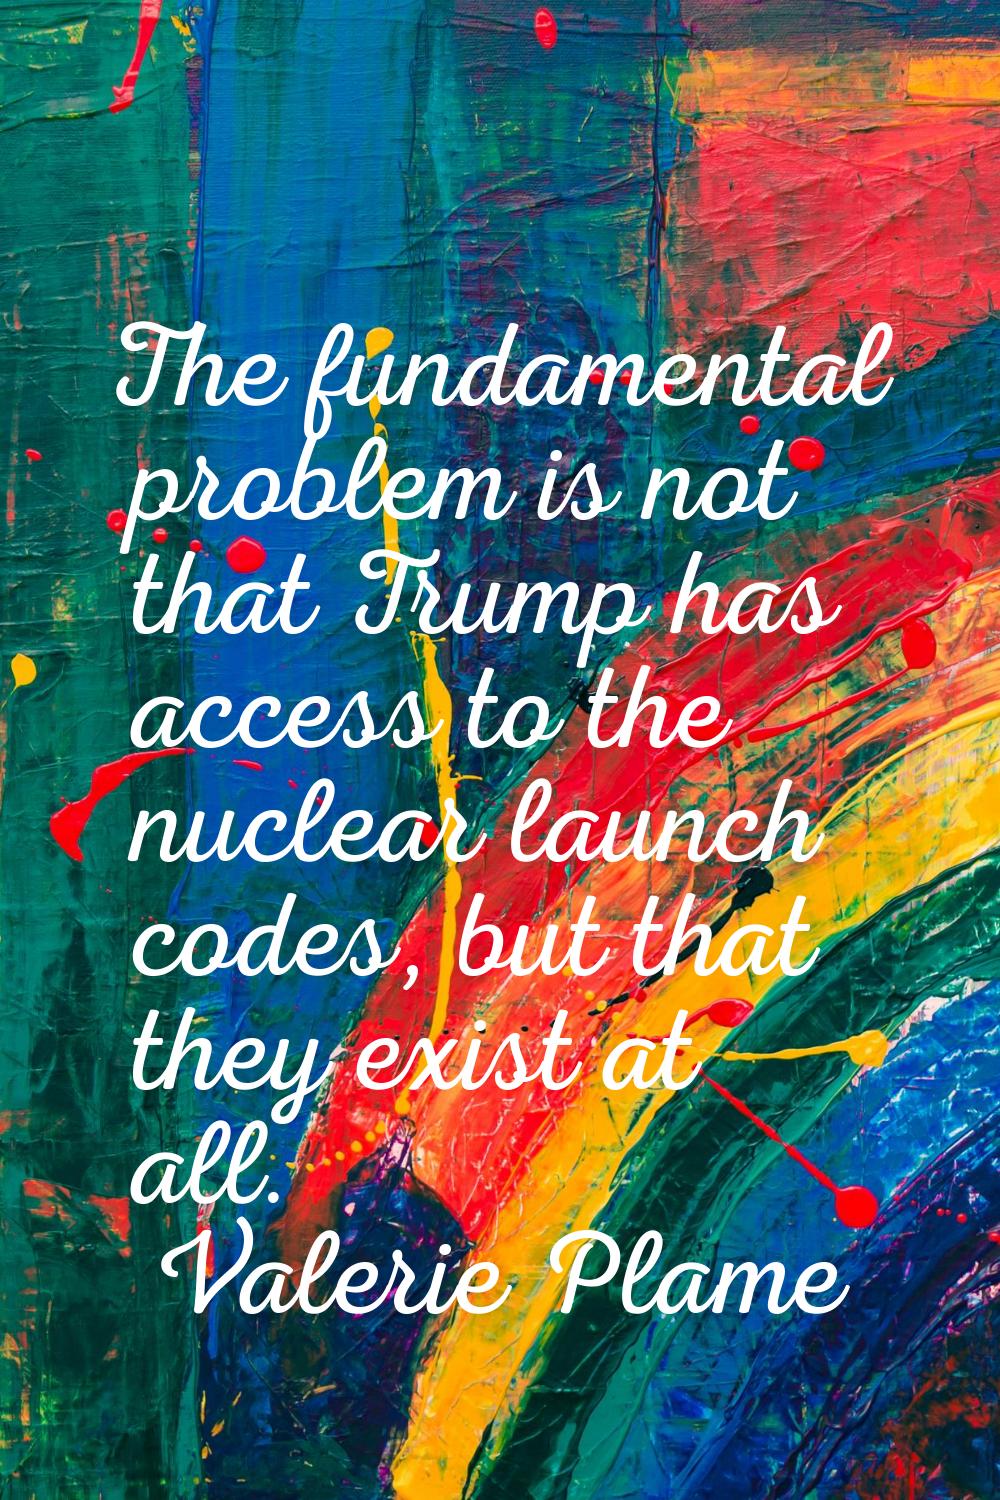 The fundamental problem is not that Trump has access to the nuclear launch codes, but that they exi